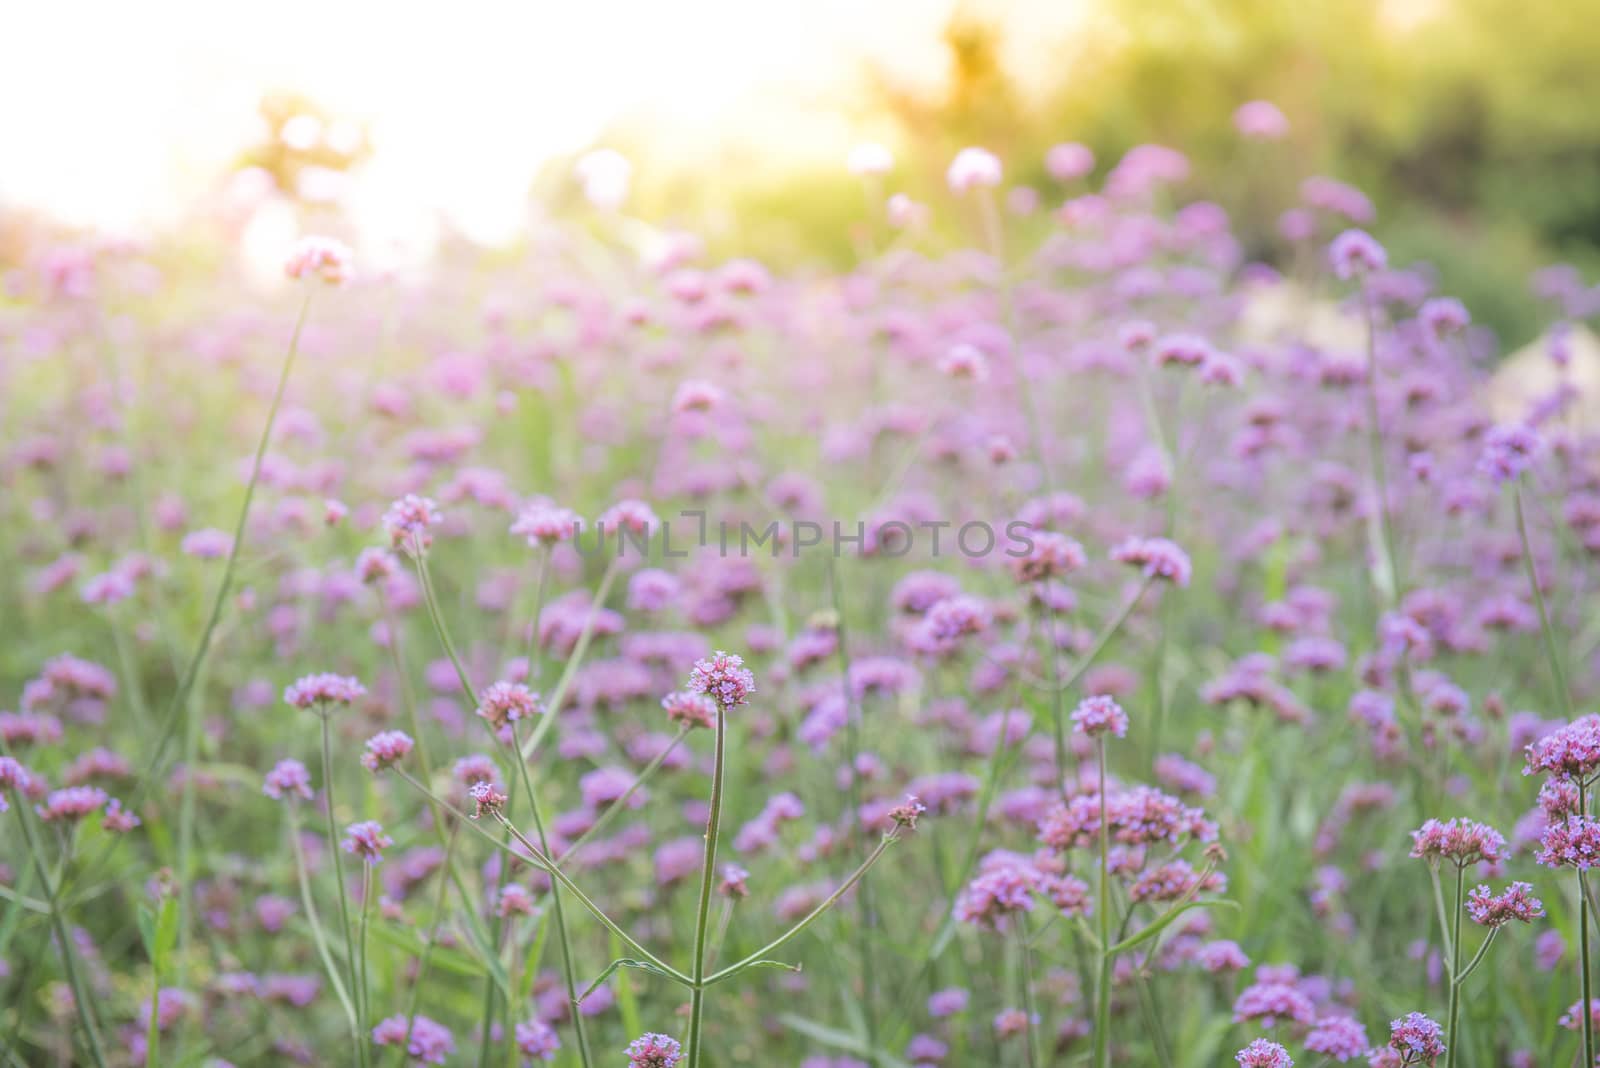 Blur Verbena bonariensis flower with light burst effet use to na by t0pkul3